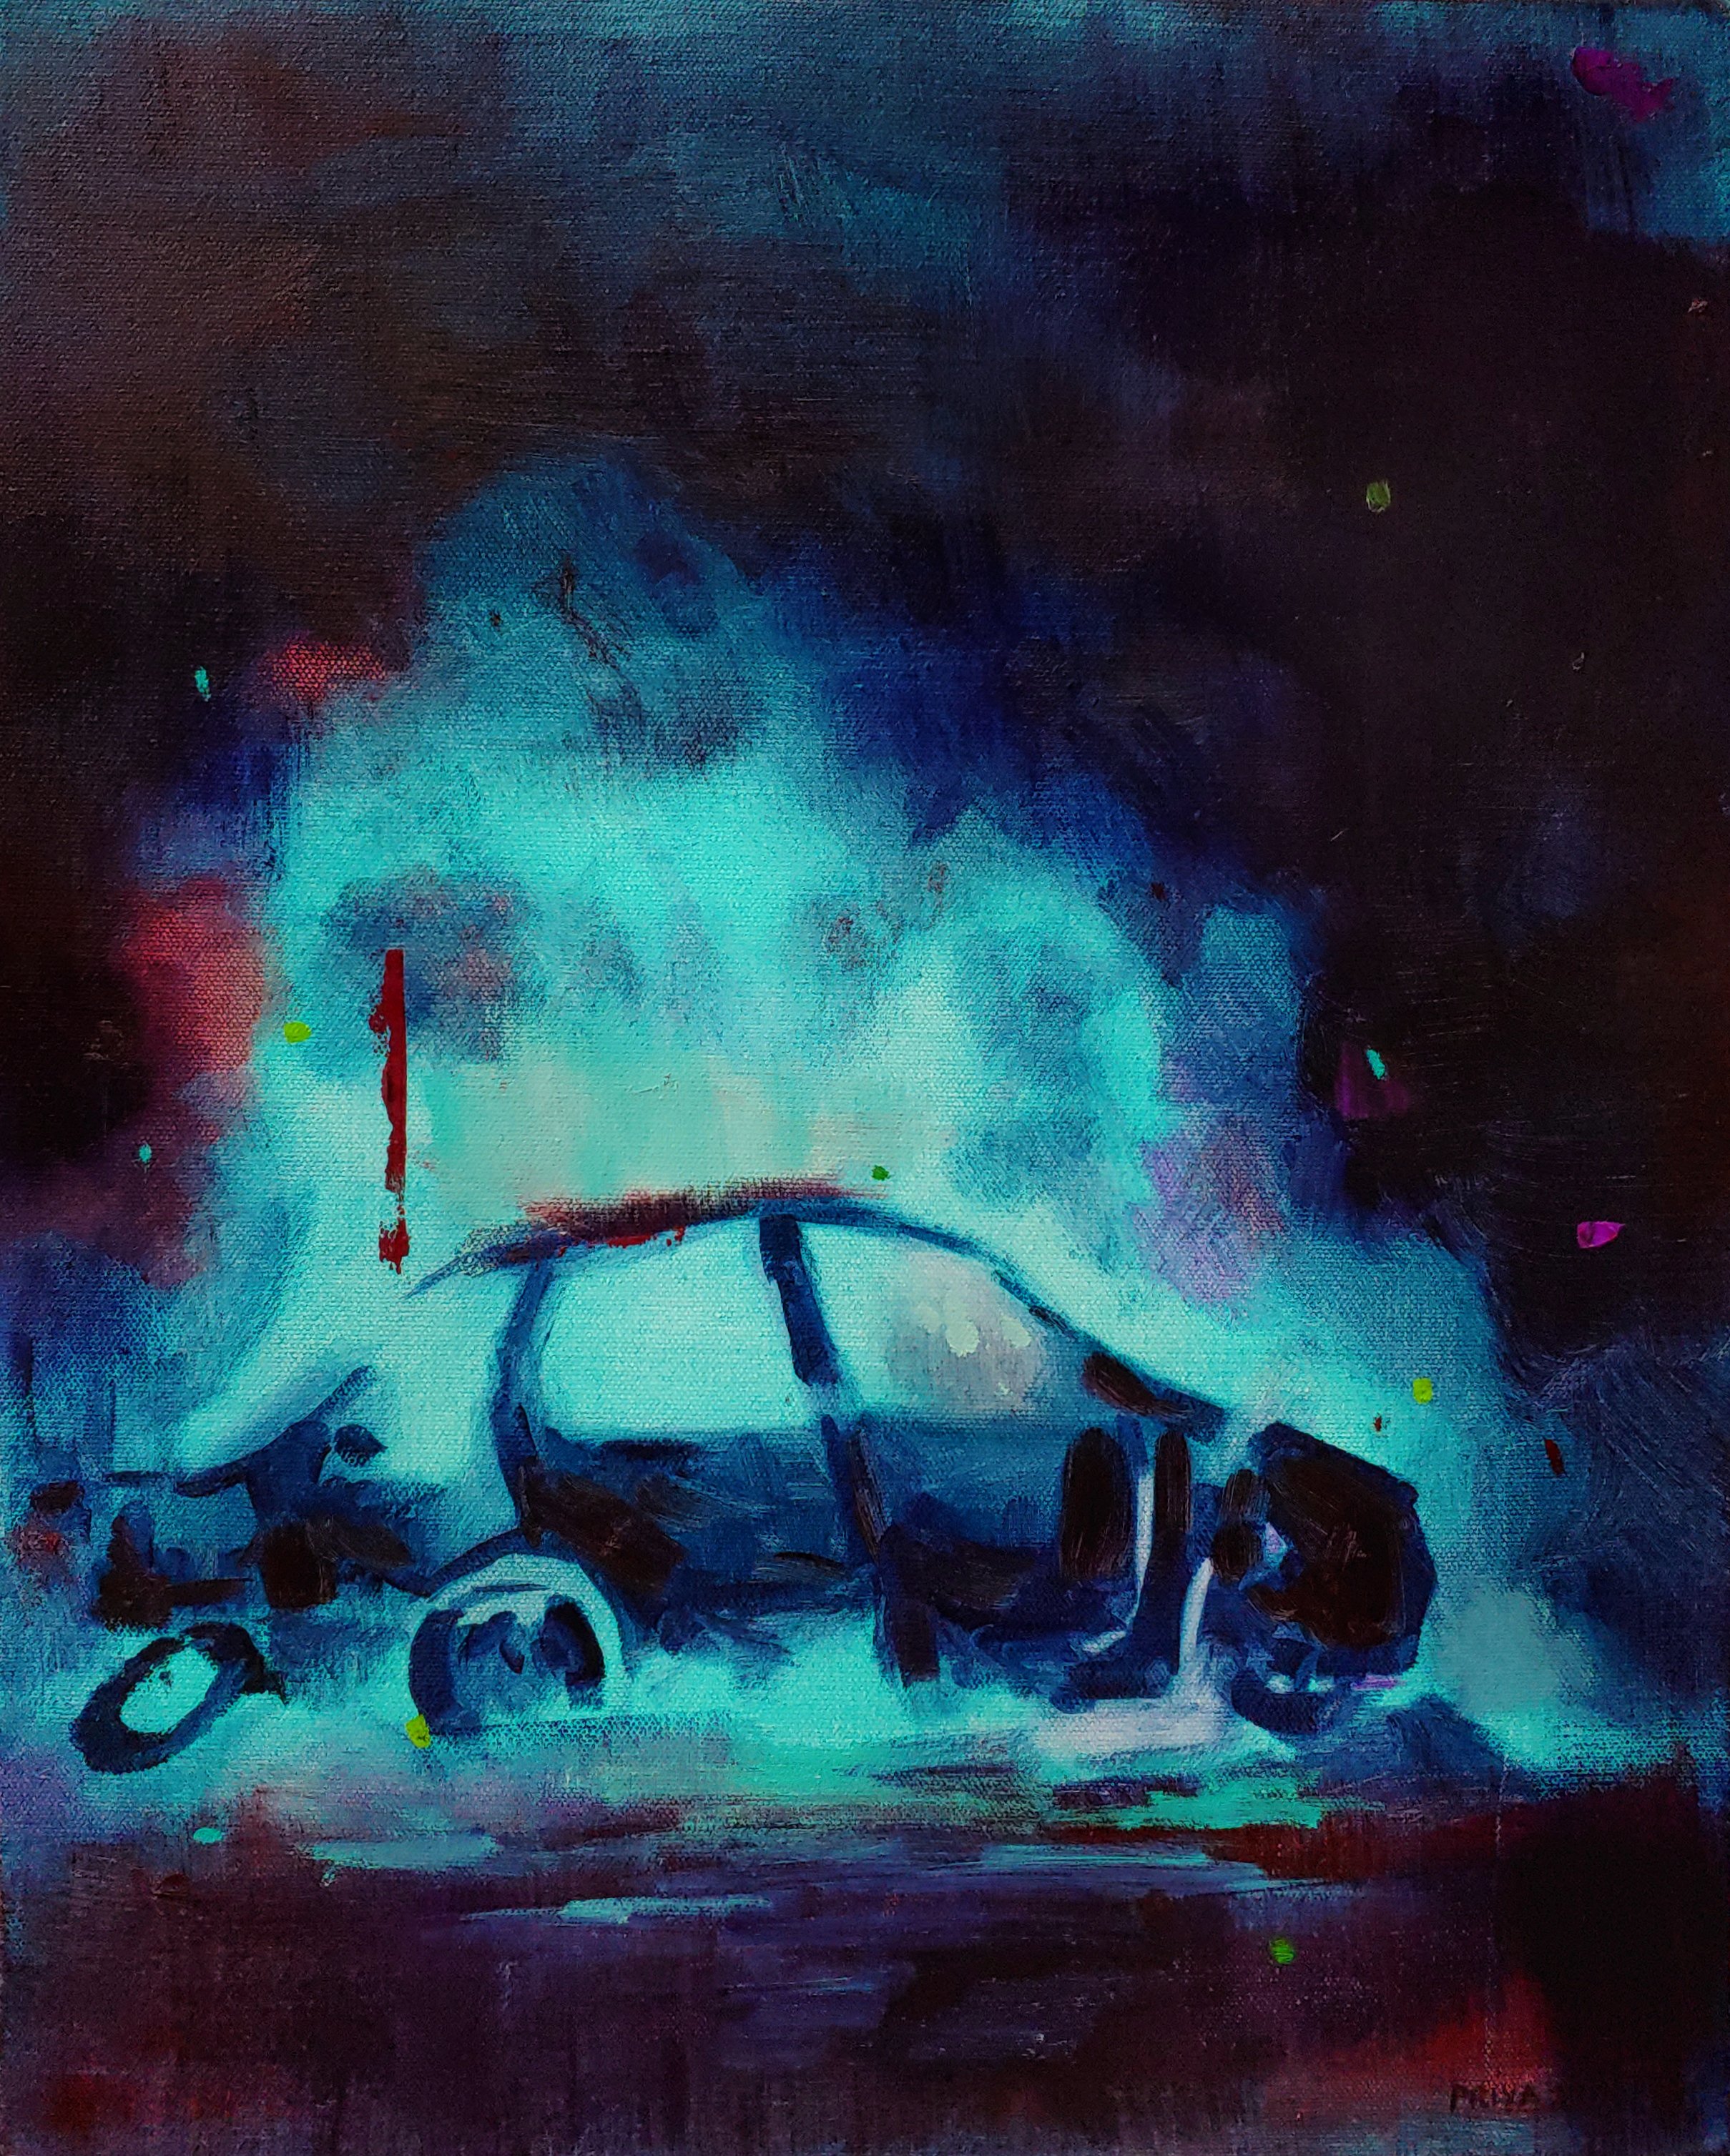 Untitled (Car on Fire)